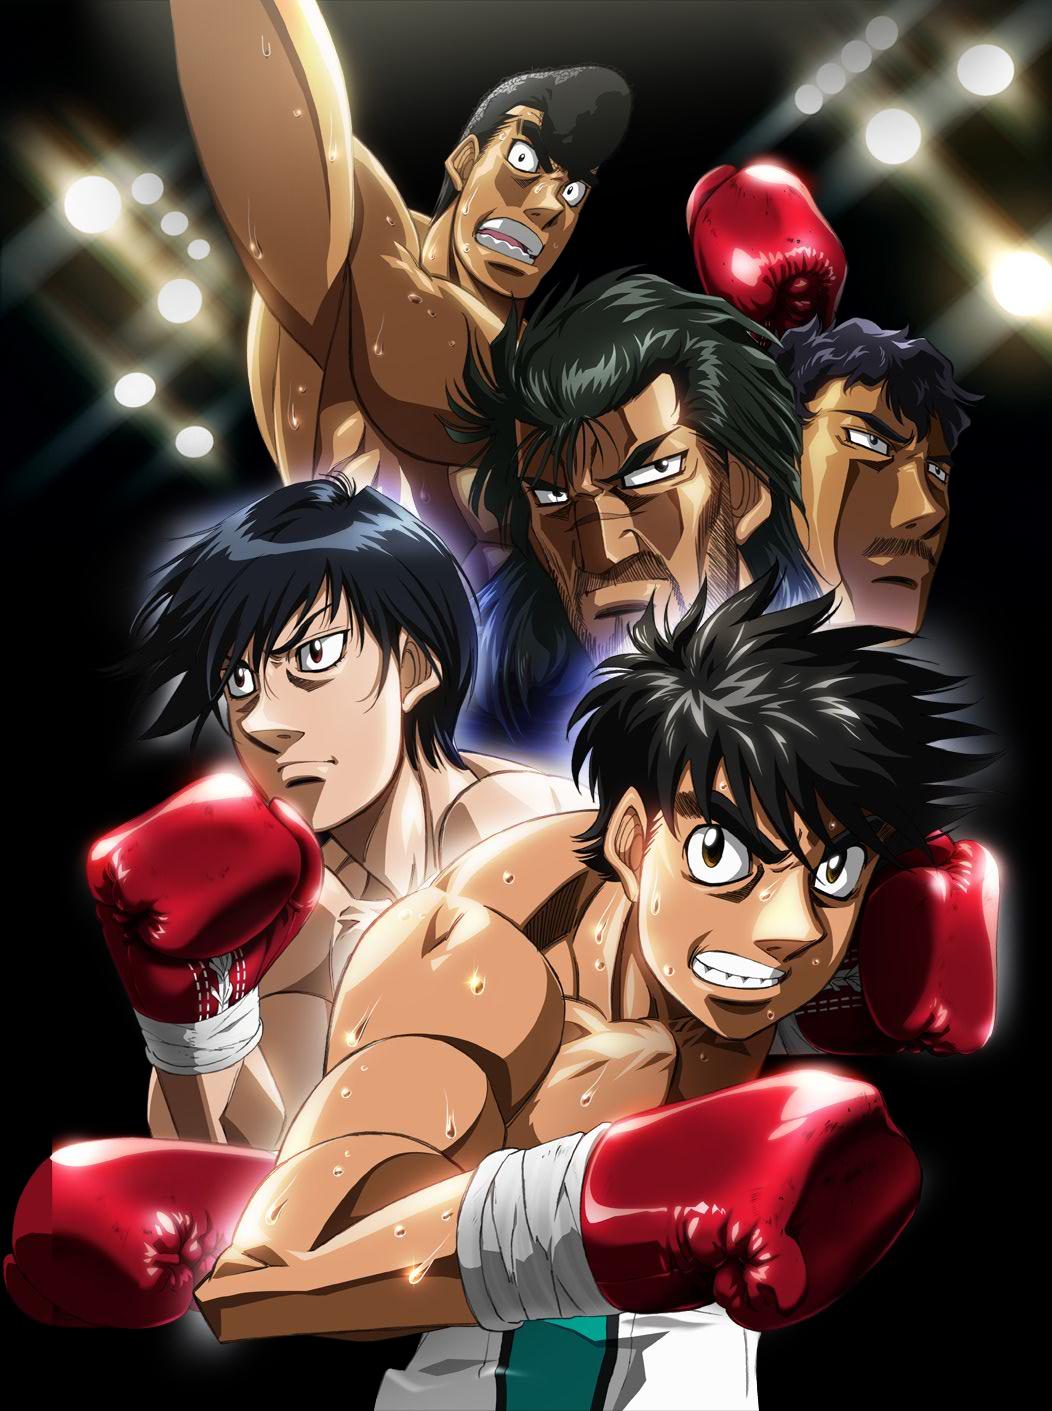 Ippo Makunouchi and Scan Gallery